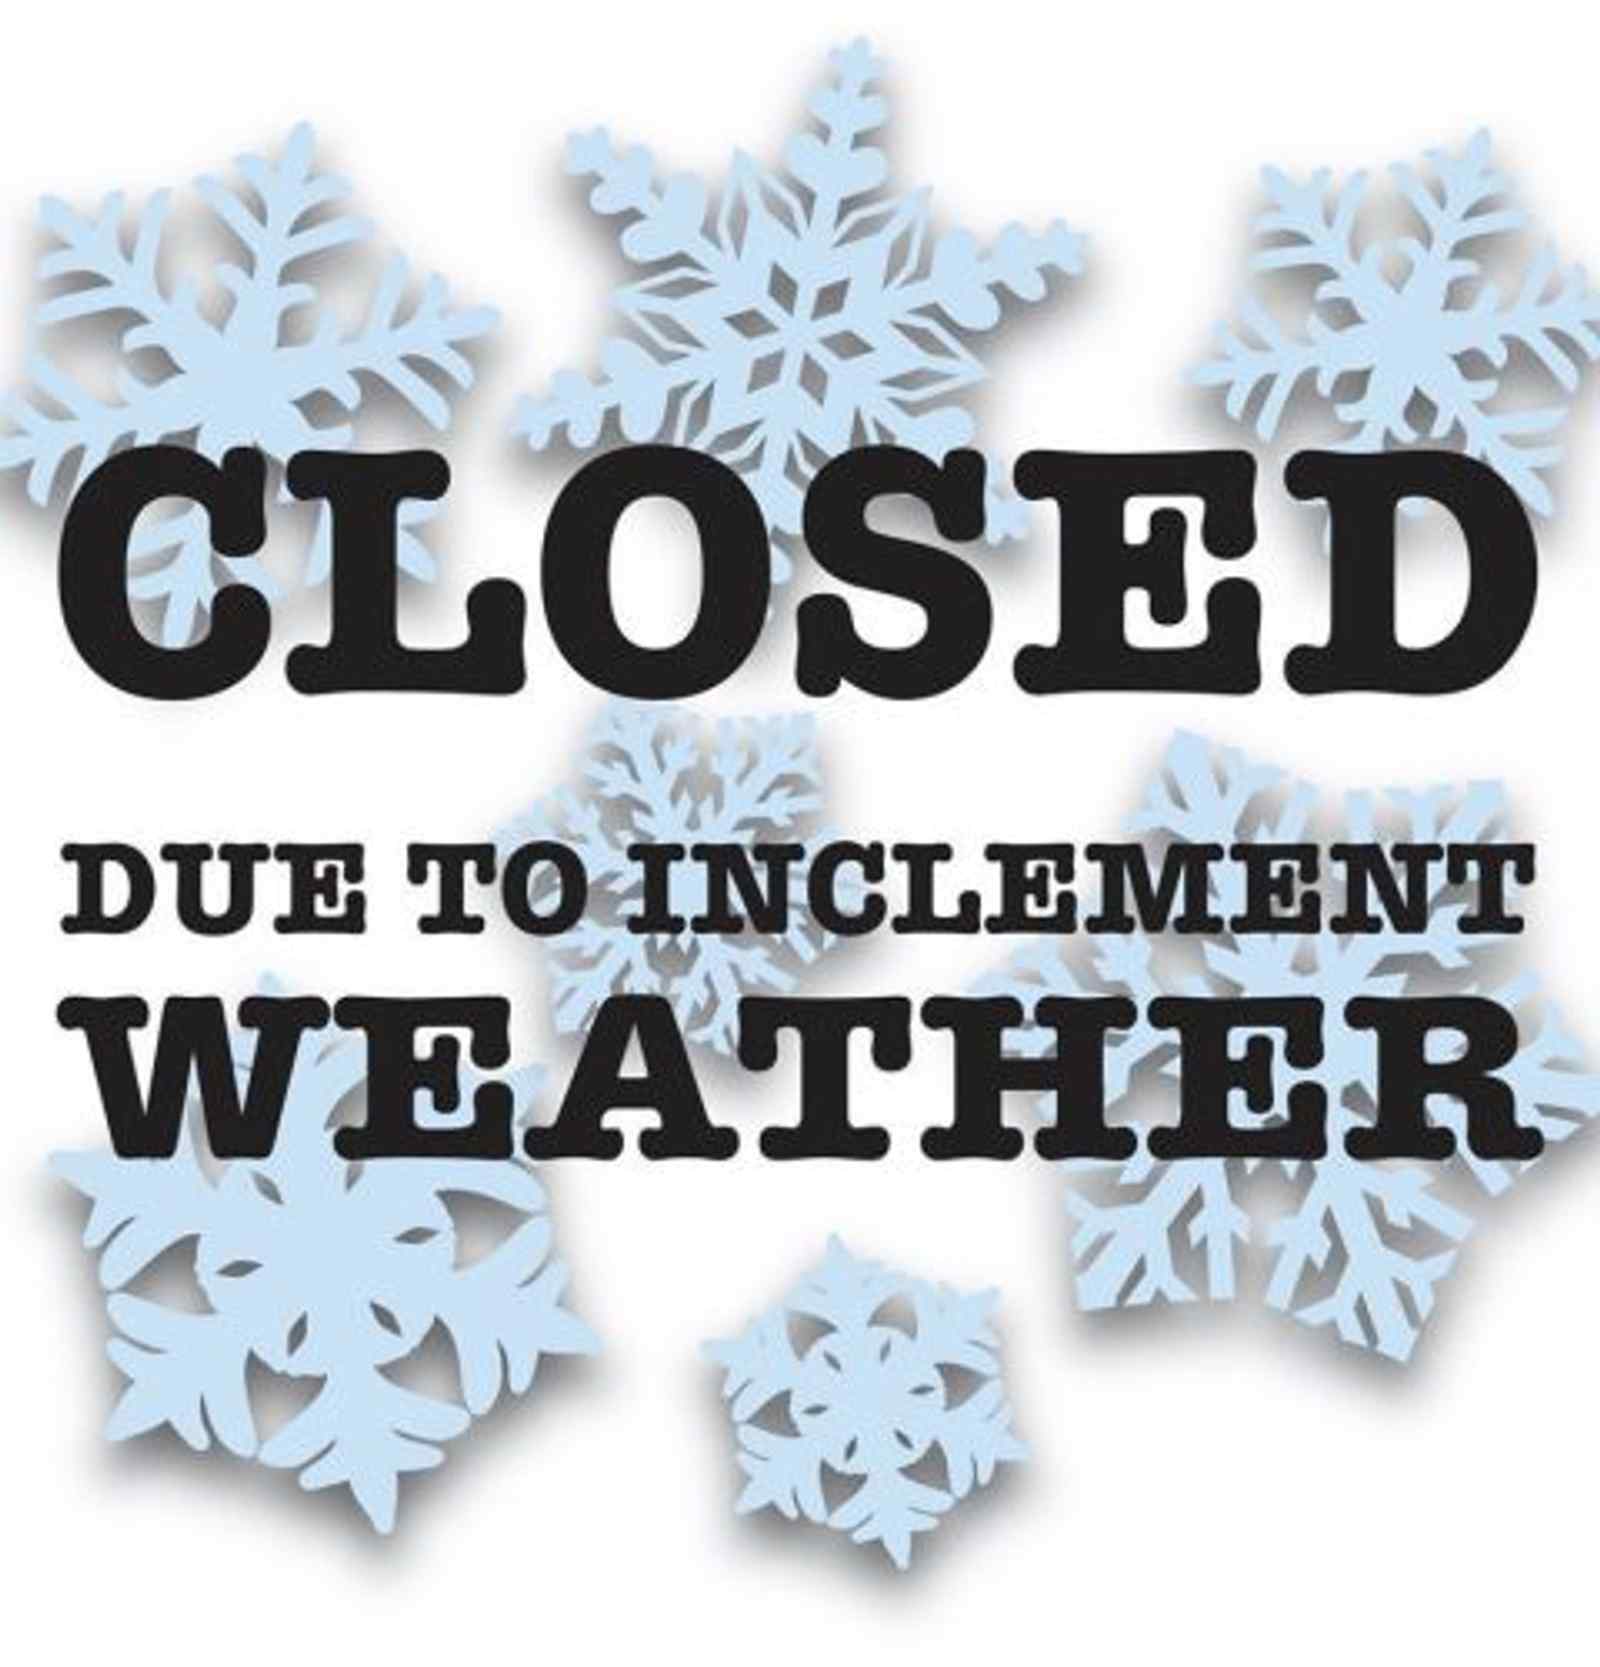 Closed - Inclement Winter Weather